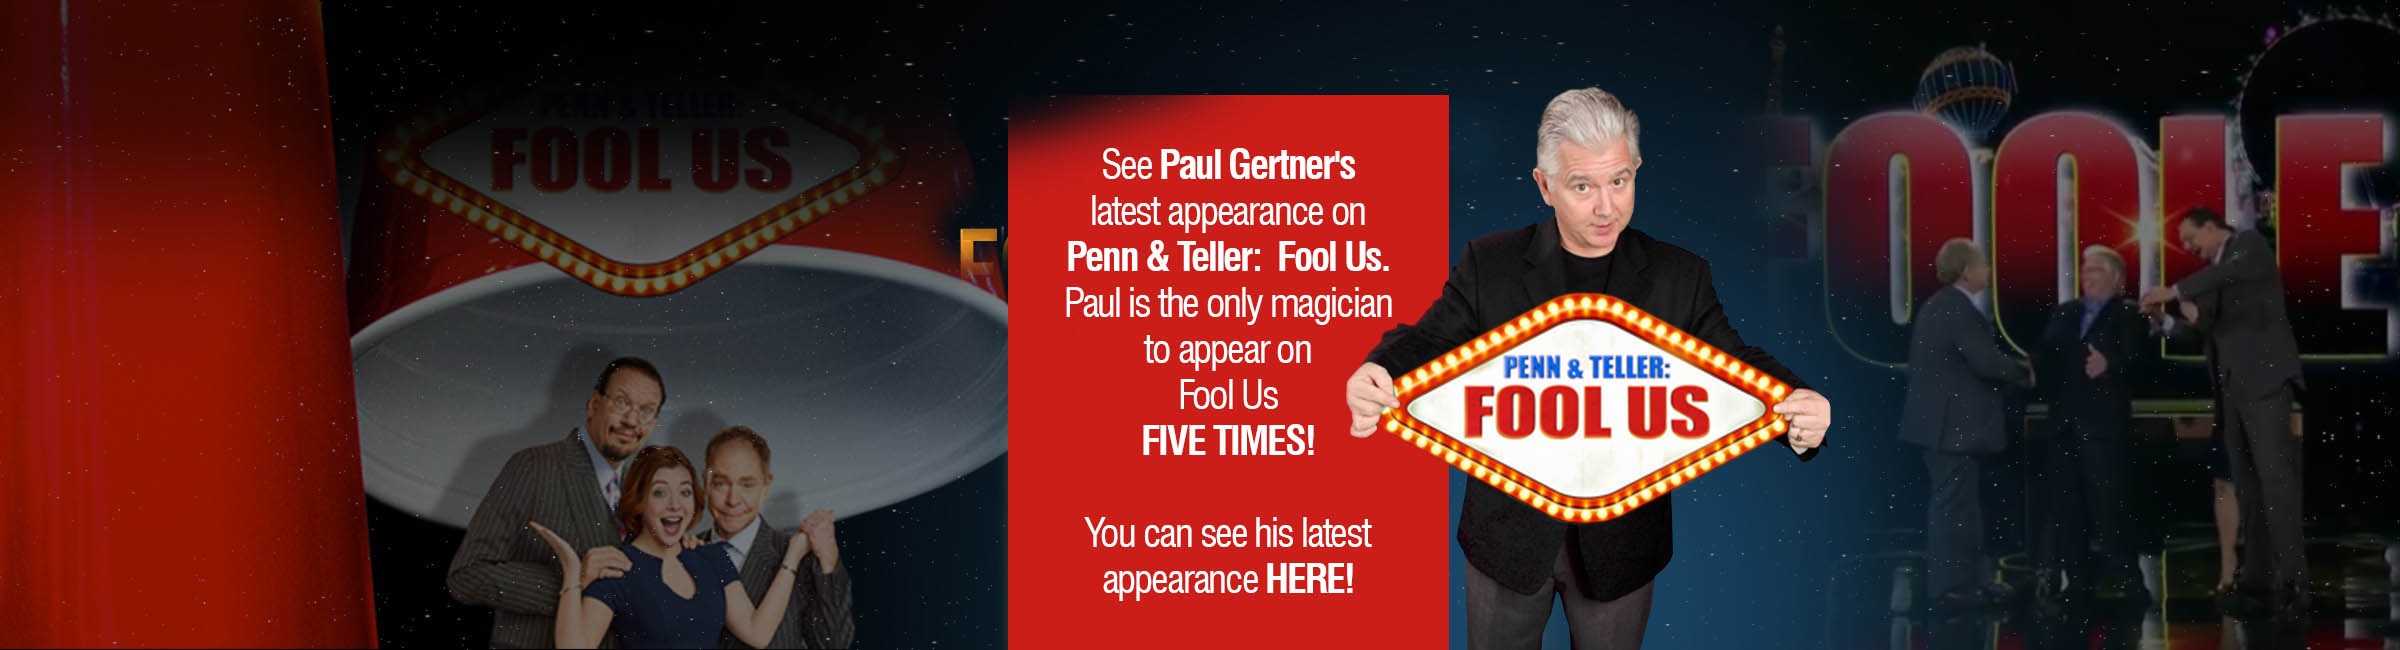 Paul Gertner the ONLY Magician to appear on Penn & Teller: Fool Us, five times.